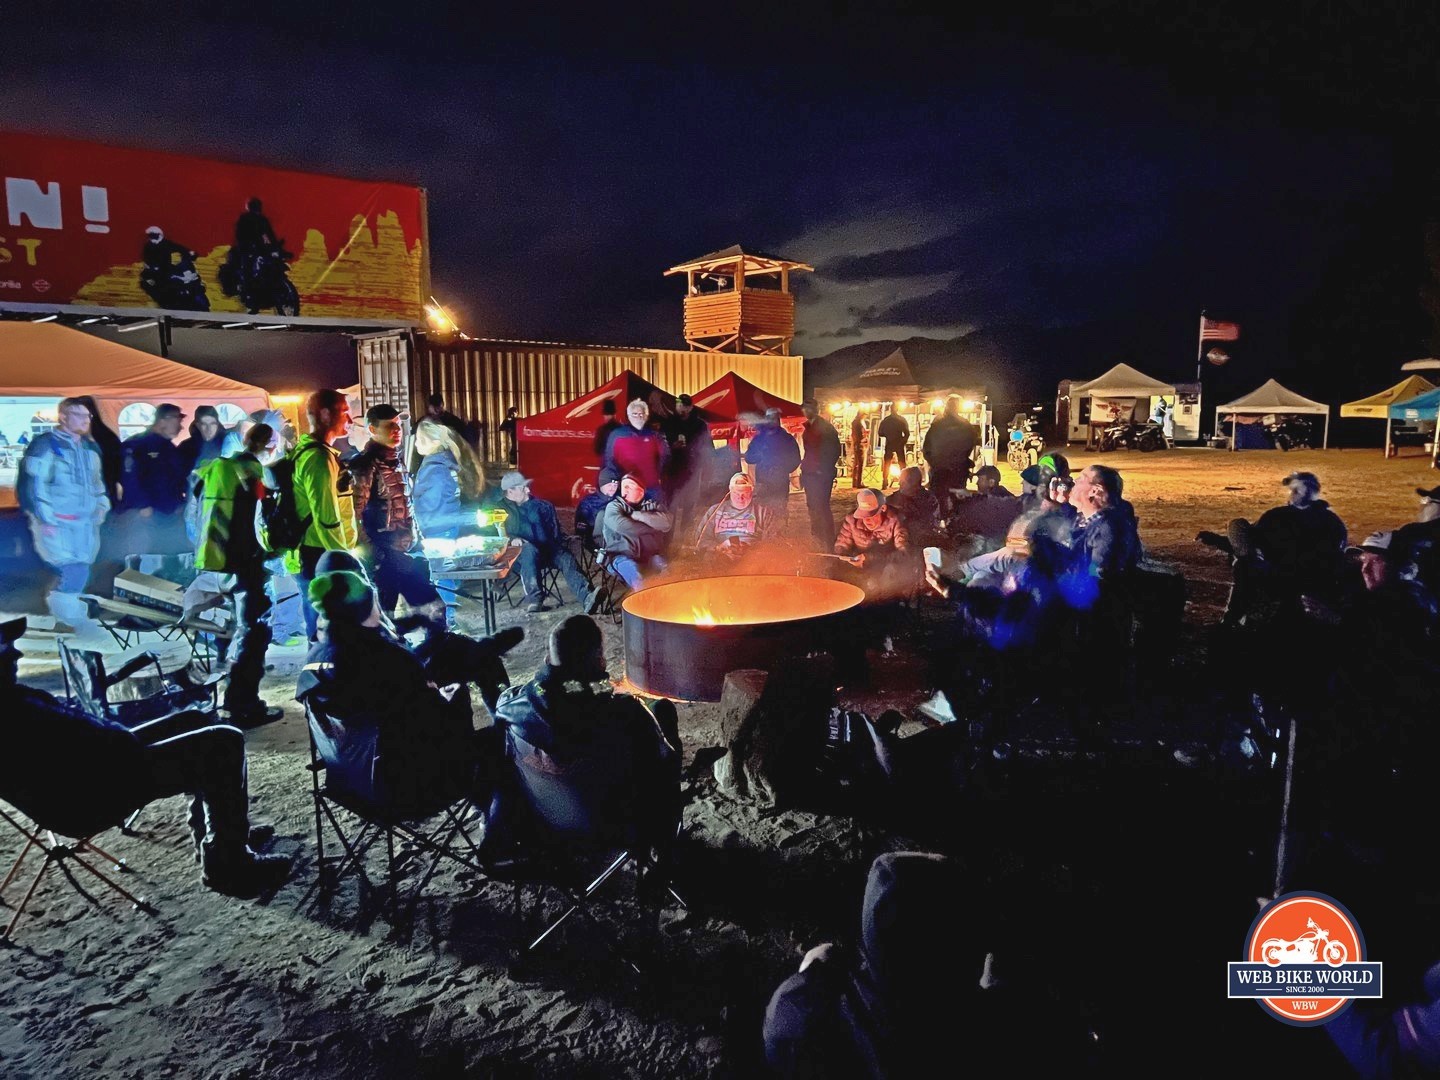 A warmer night spent enjoying each others' company around the fire at GET ON! Adventure Fest Mojave.